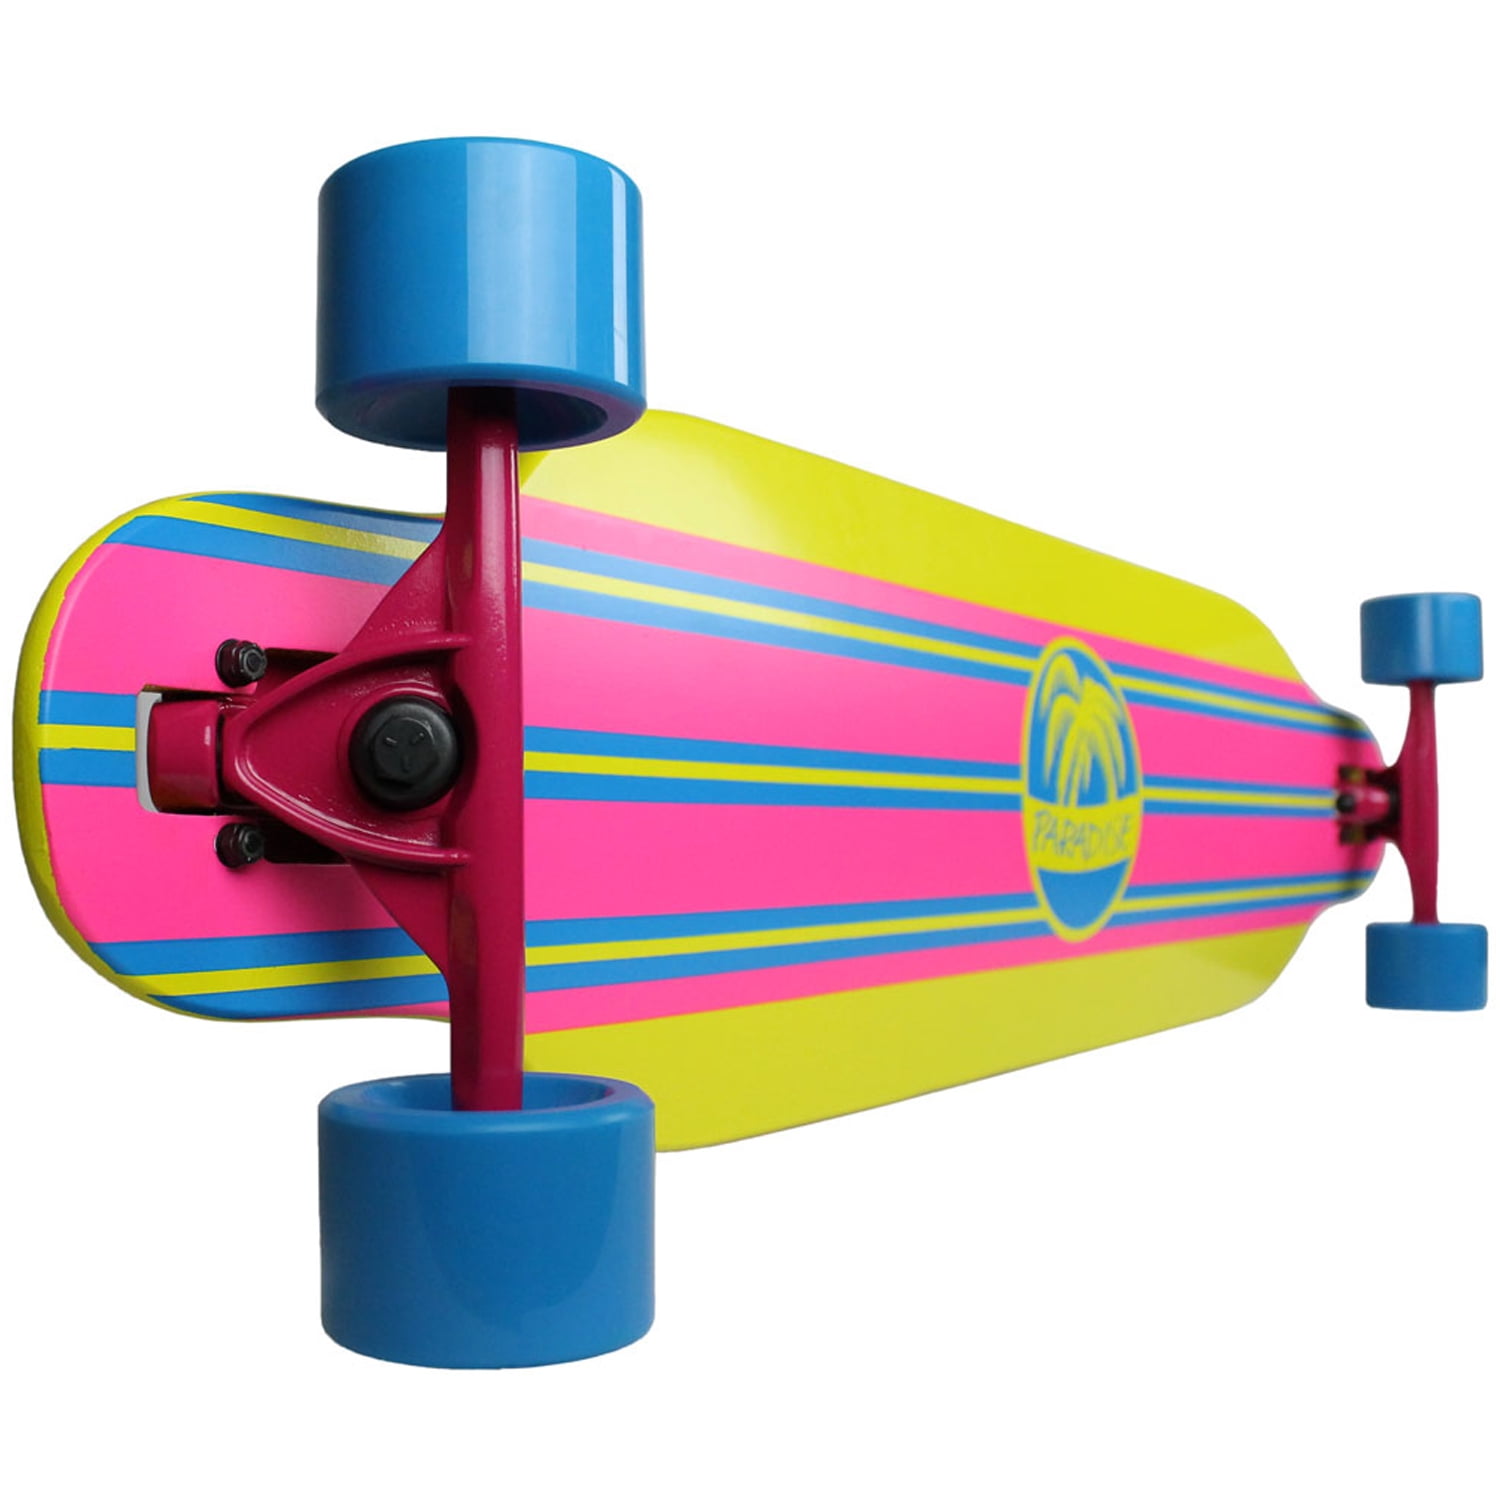 Paradise White Sunset Complete Longboard 9.5x39.5-Inch 